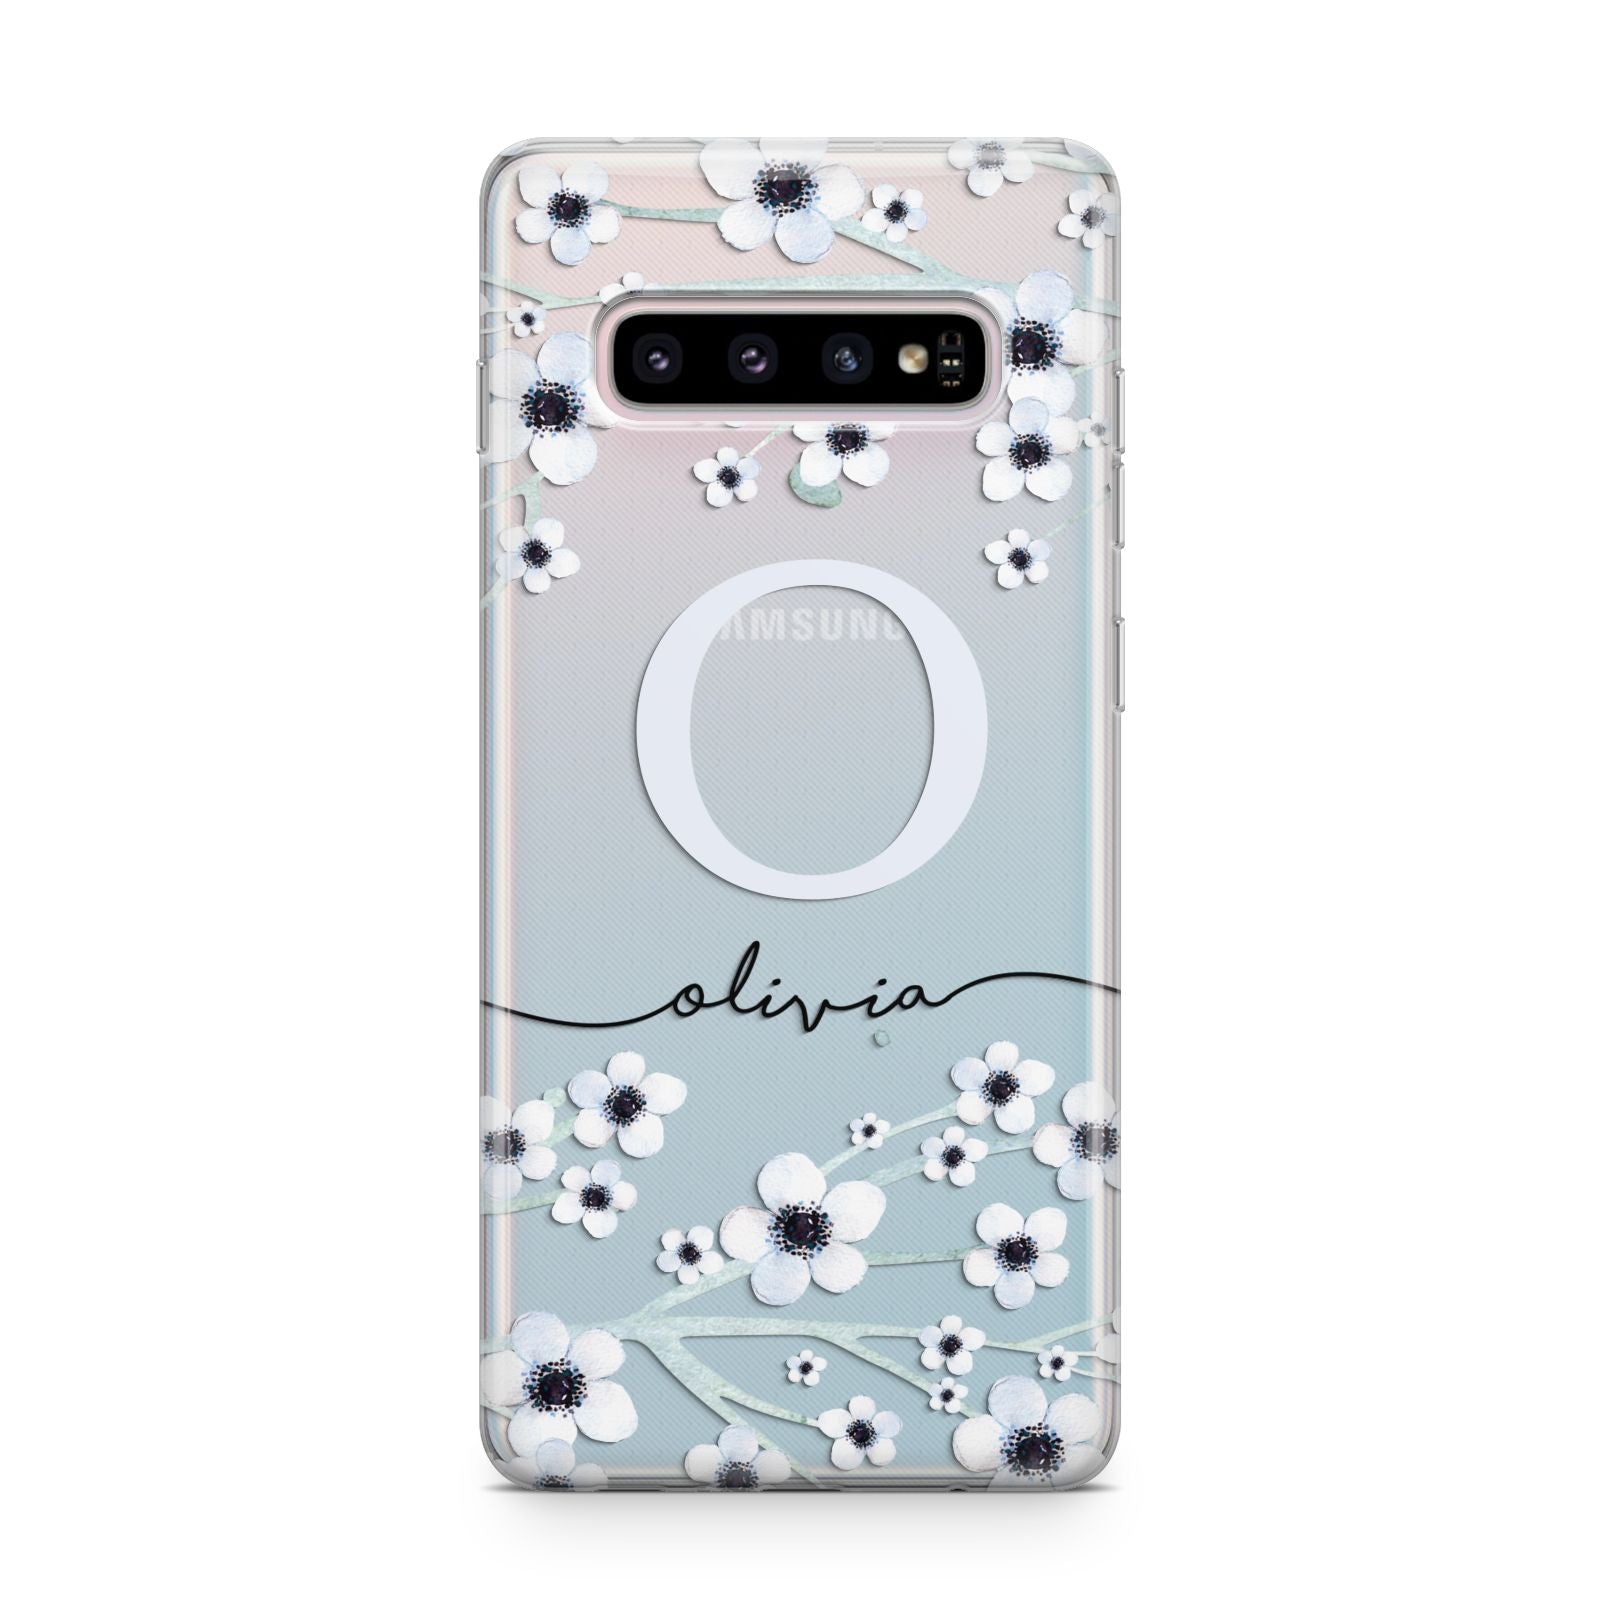 Personalised White Flower Samsung Galaxy S10 Plus Case